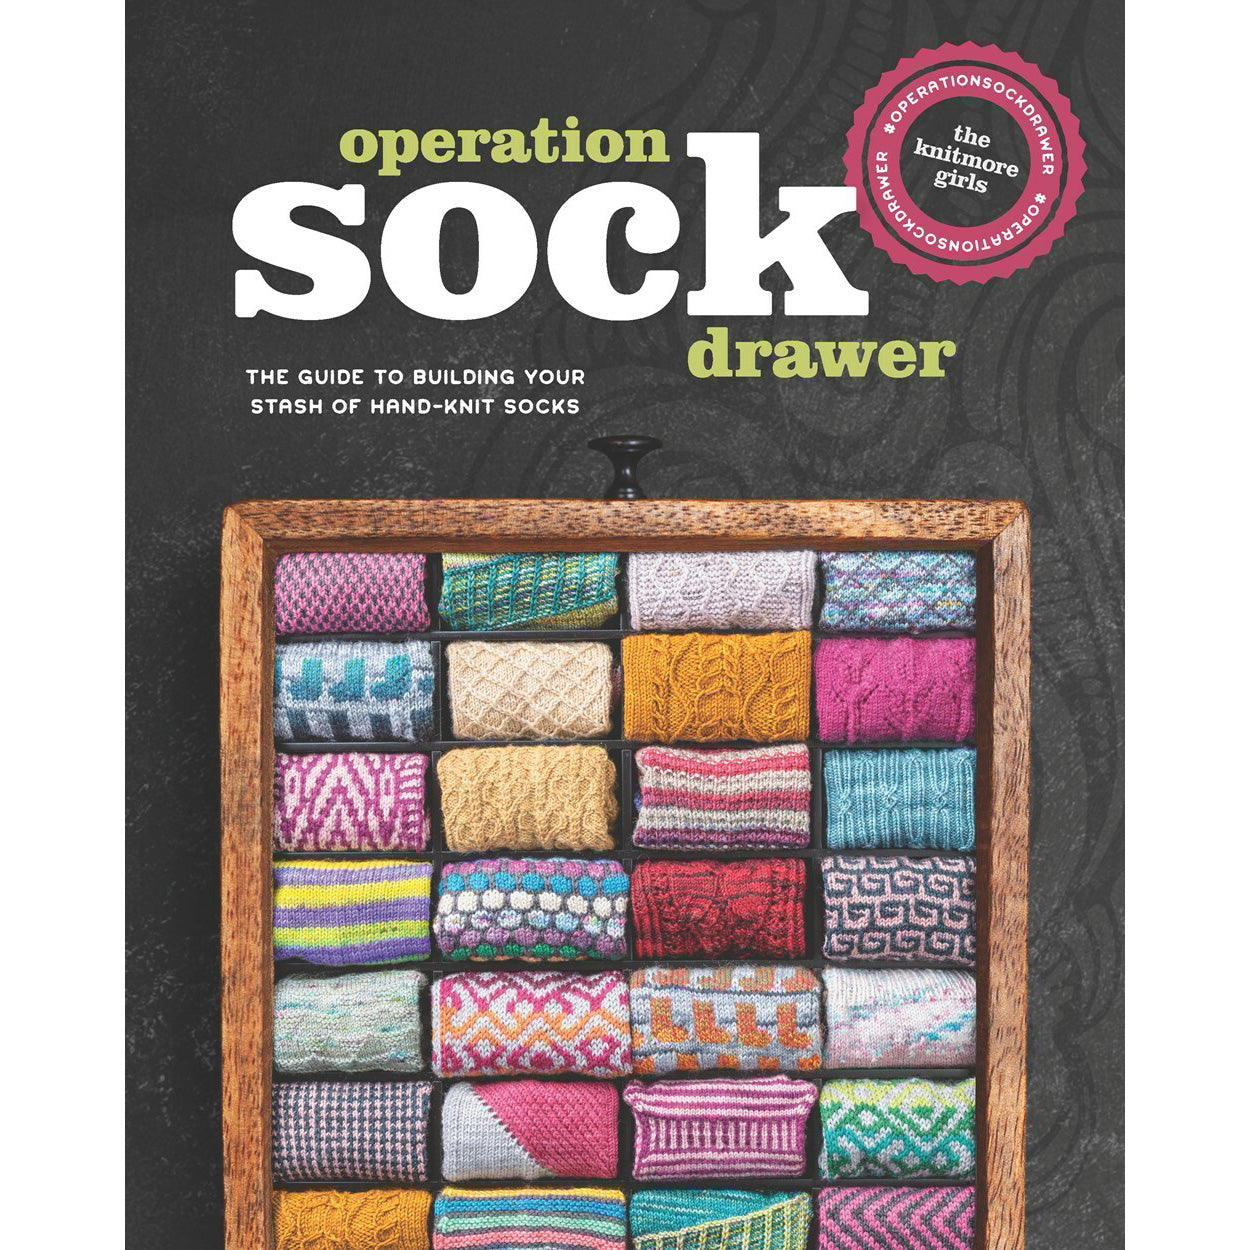 Operation Sock Drawer: The Guide to Building Your Stash of Handmade Socks (Knitmore Girls)